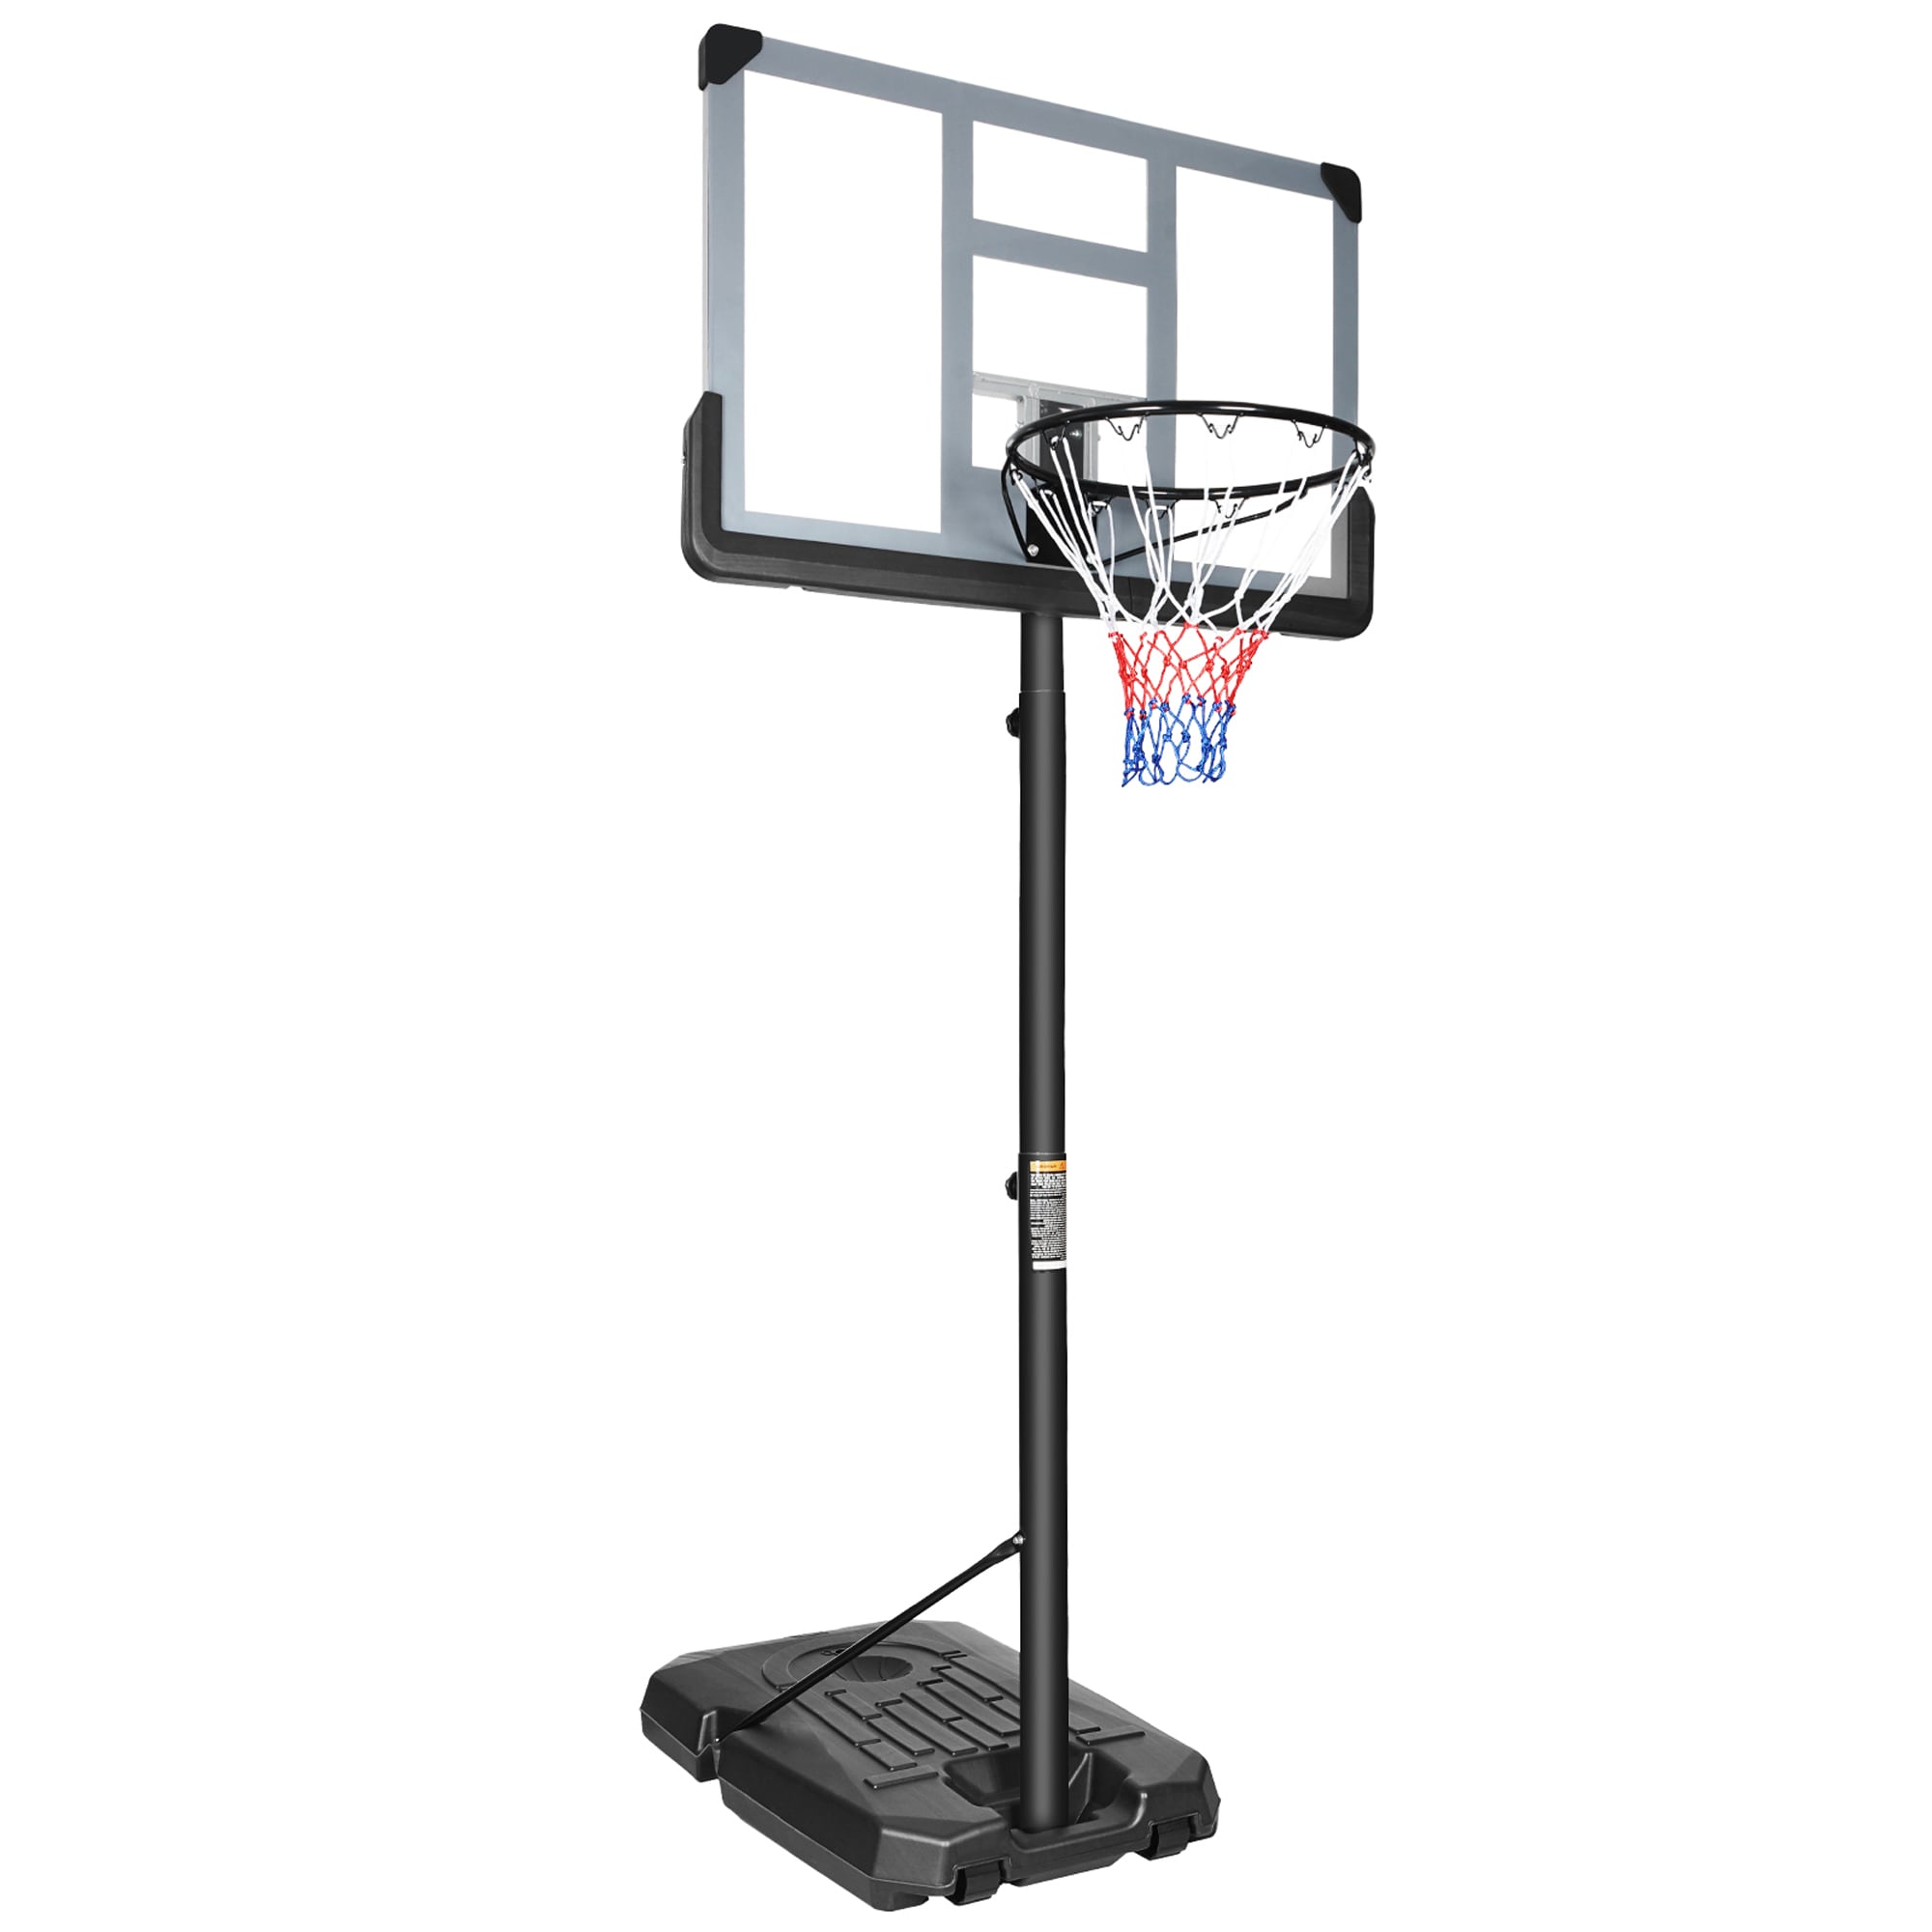 Gaierptone Portable Basketball System with Adjustable Height - 27.6-in Backboard - Polycarbonate - Iron Frame - Black | CRXCEARVO0S